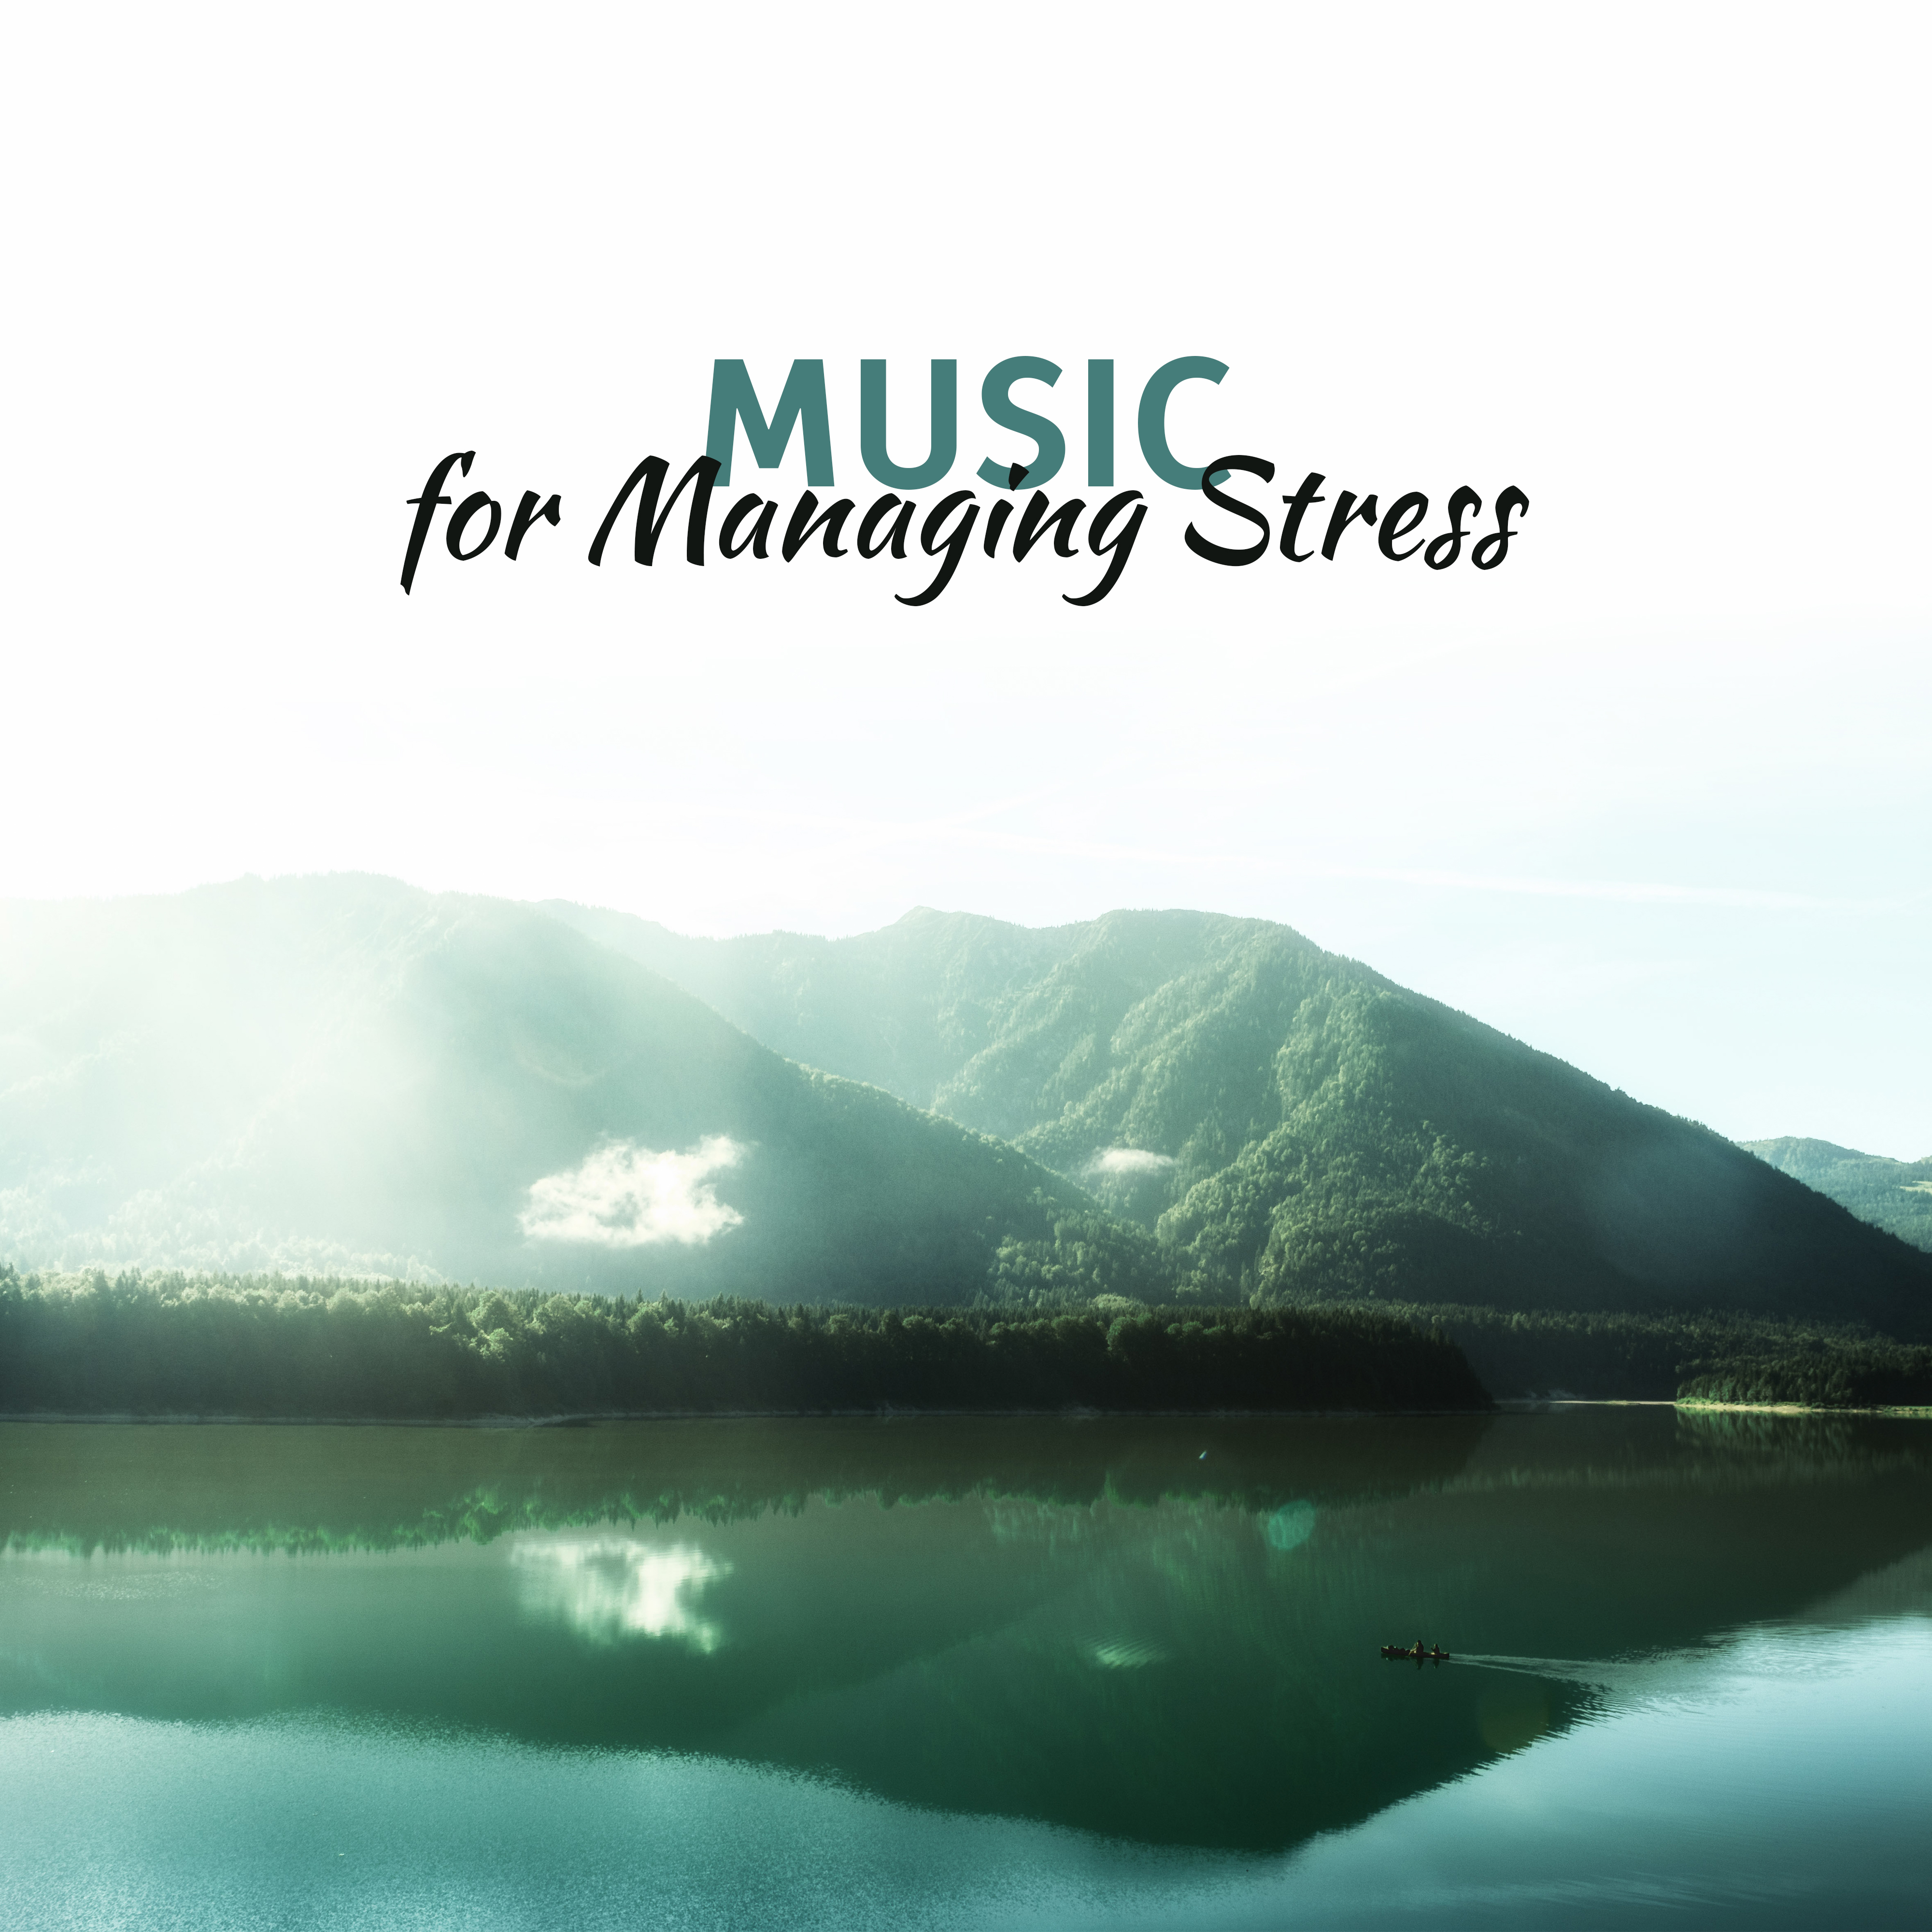 Music for Managing Stress – Relaxing Music Therapy, Stress Relief, Anti-Stress Music, Study, Learning